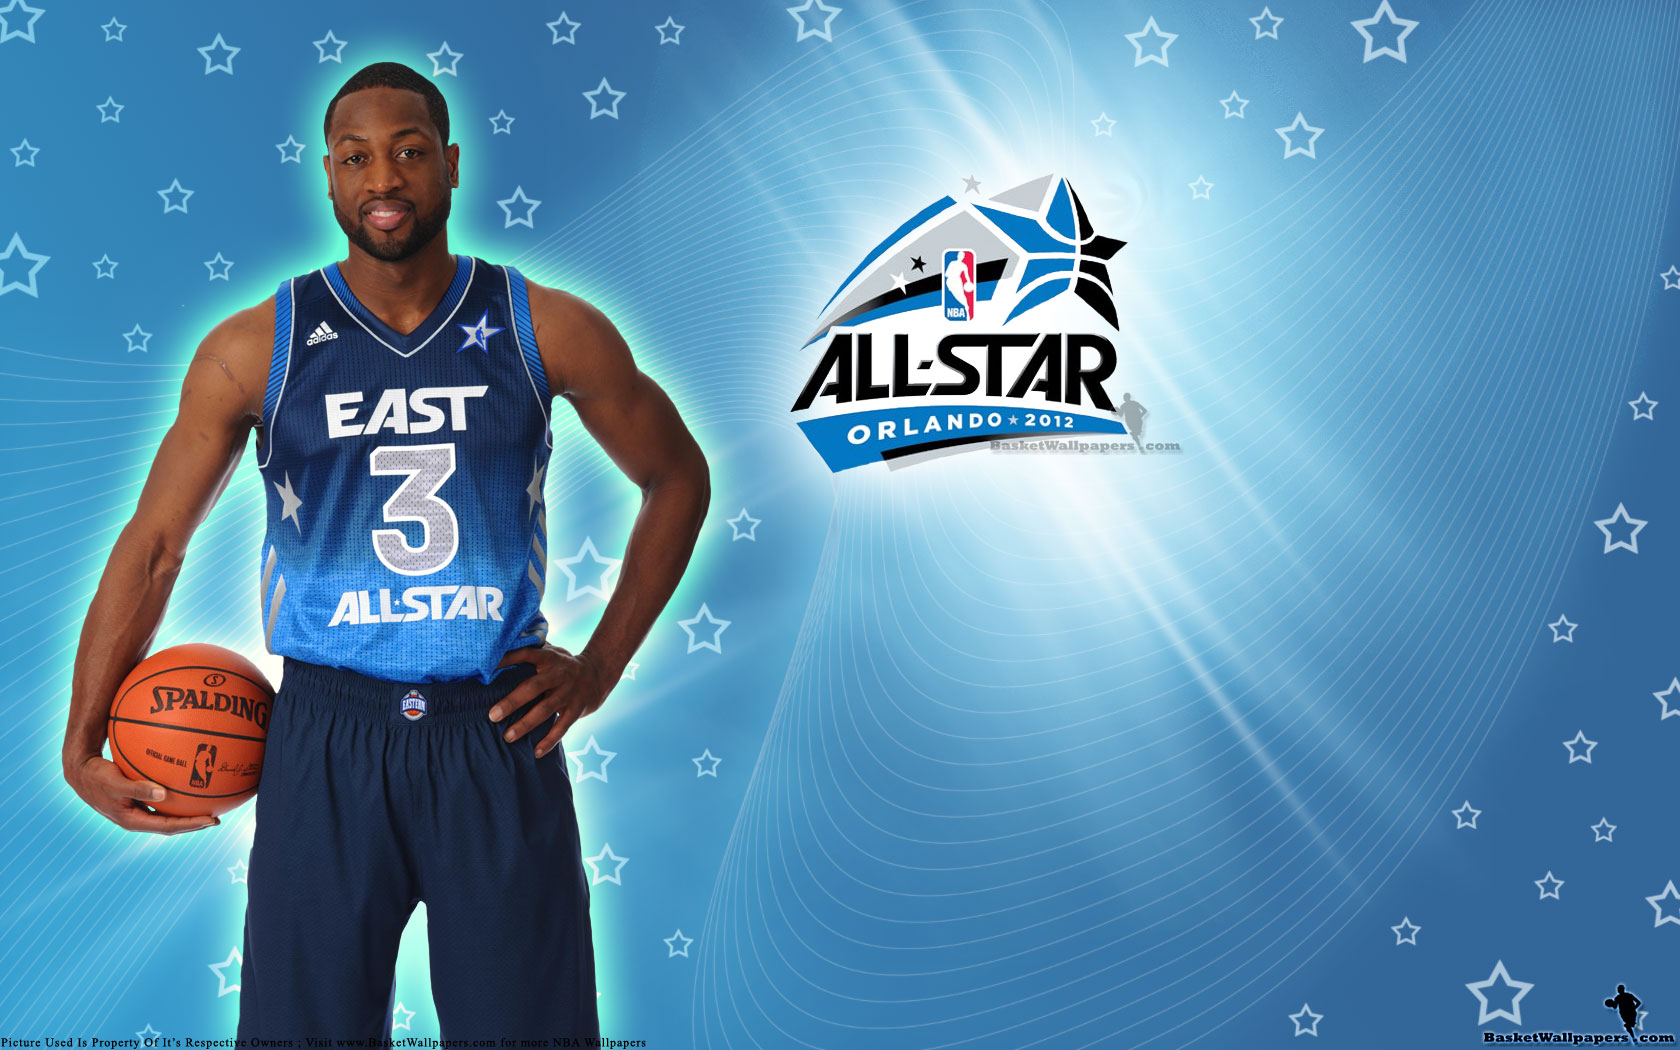 wade all star jersey